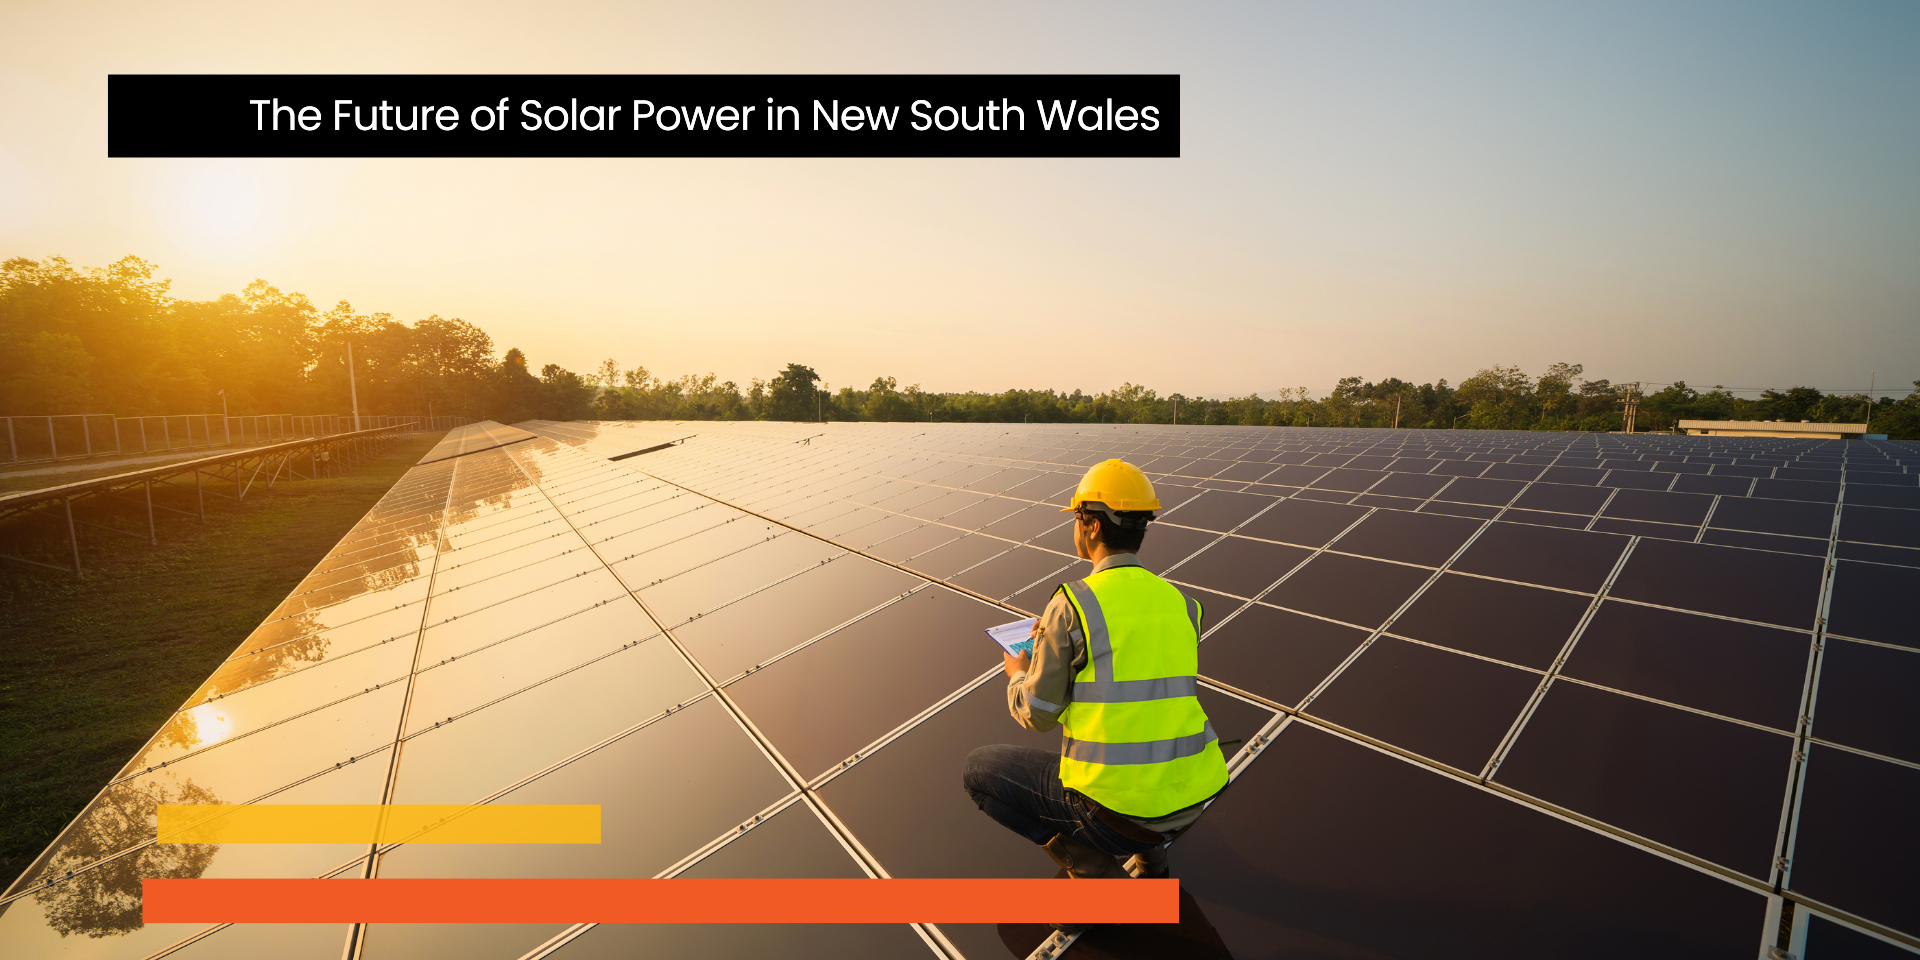 The Future of Solar Power in New South Wales